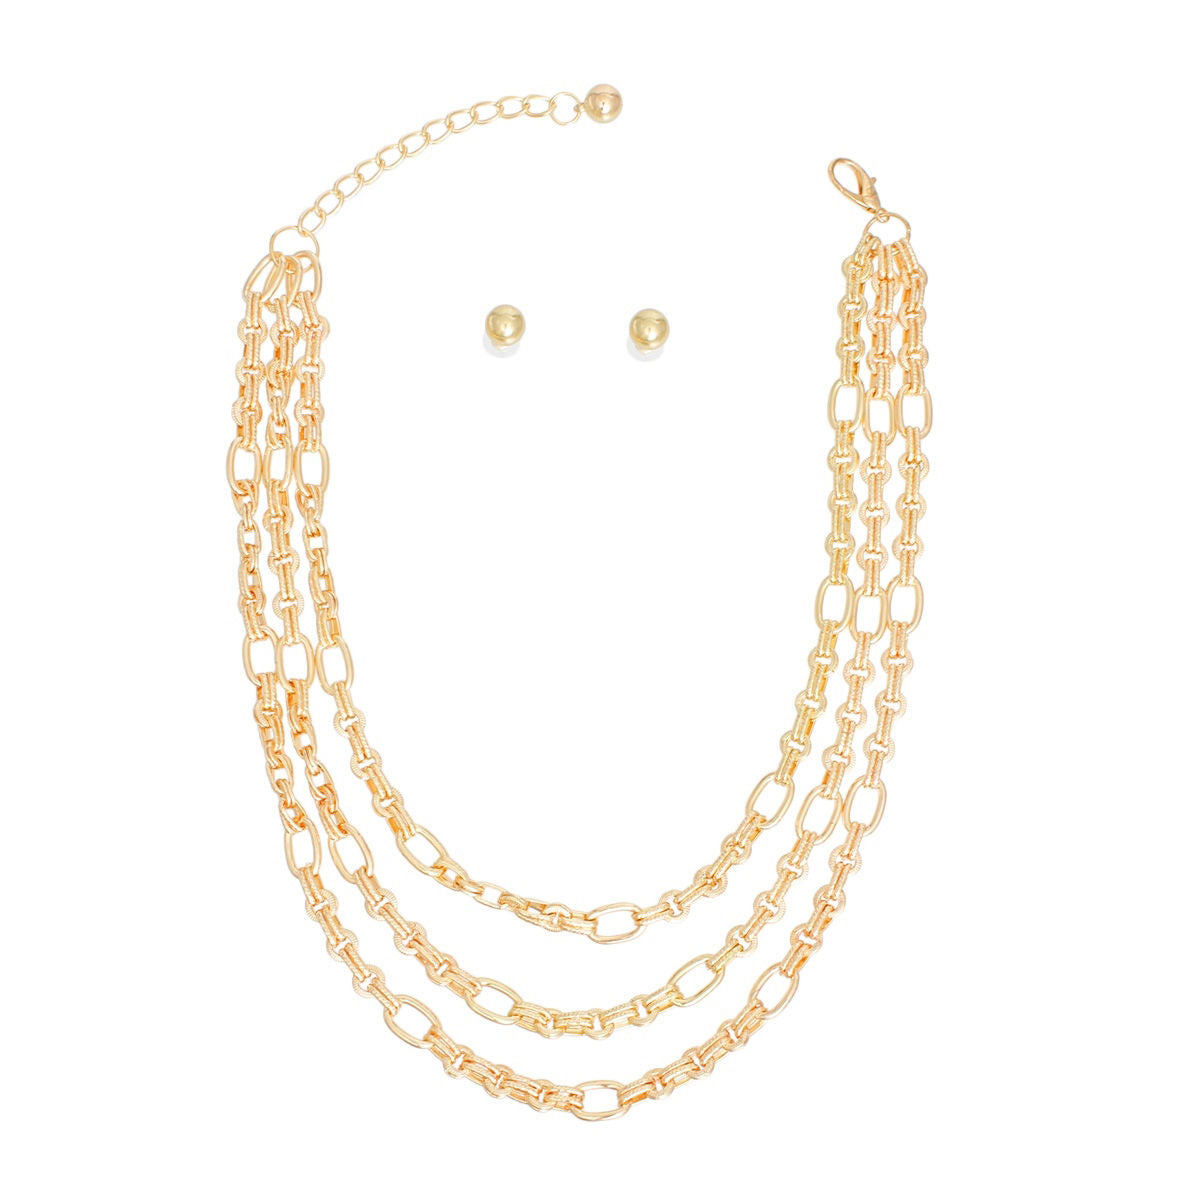 Necklace Gold Triple Chain Link Set for Women